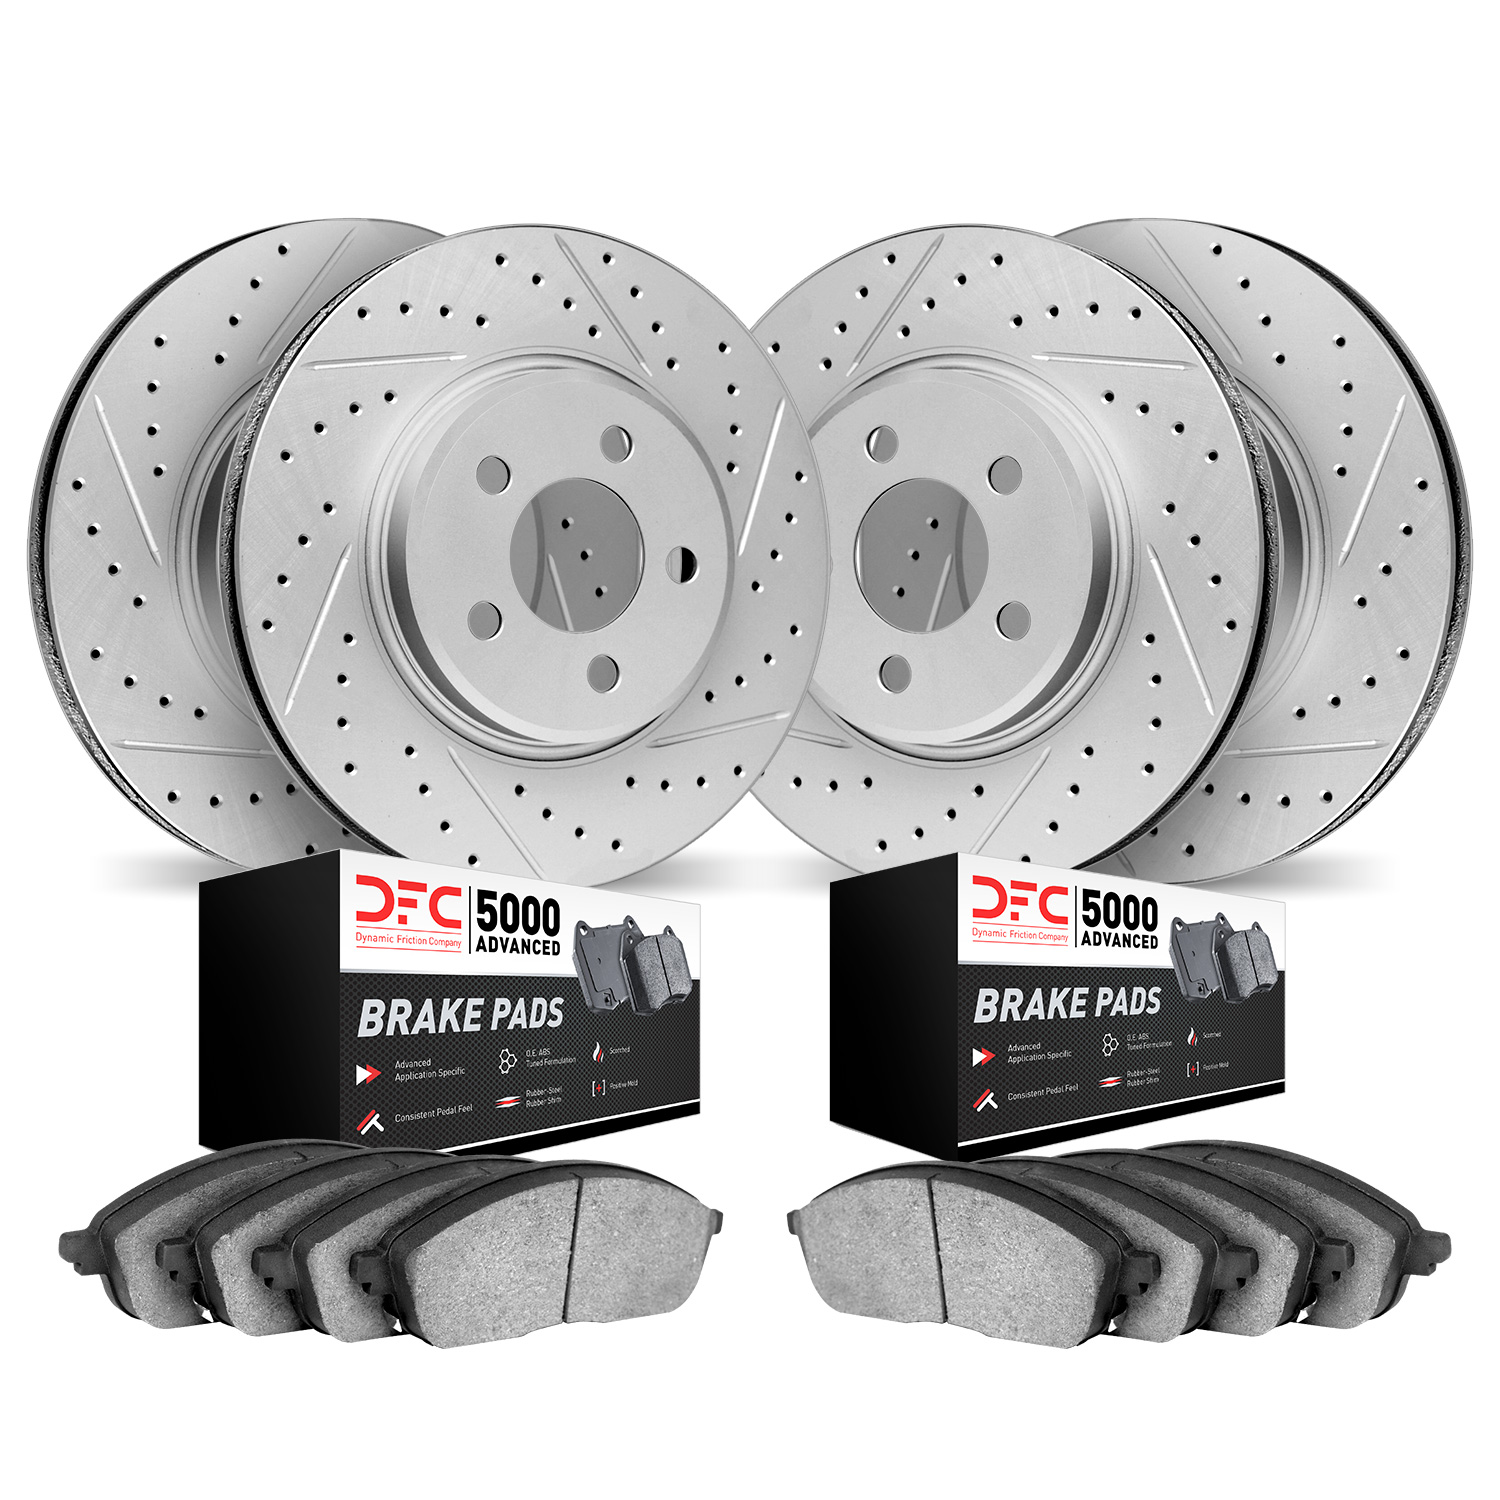 2504-40100 Geoperformance Drilled/Slotted Rotors w/5000 Advanced Brake Pads Kit, 2004-2004 Mopar, Position: Front and Rear